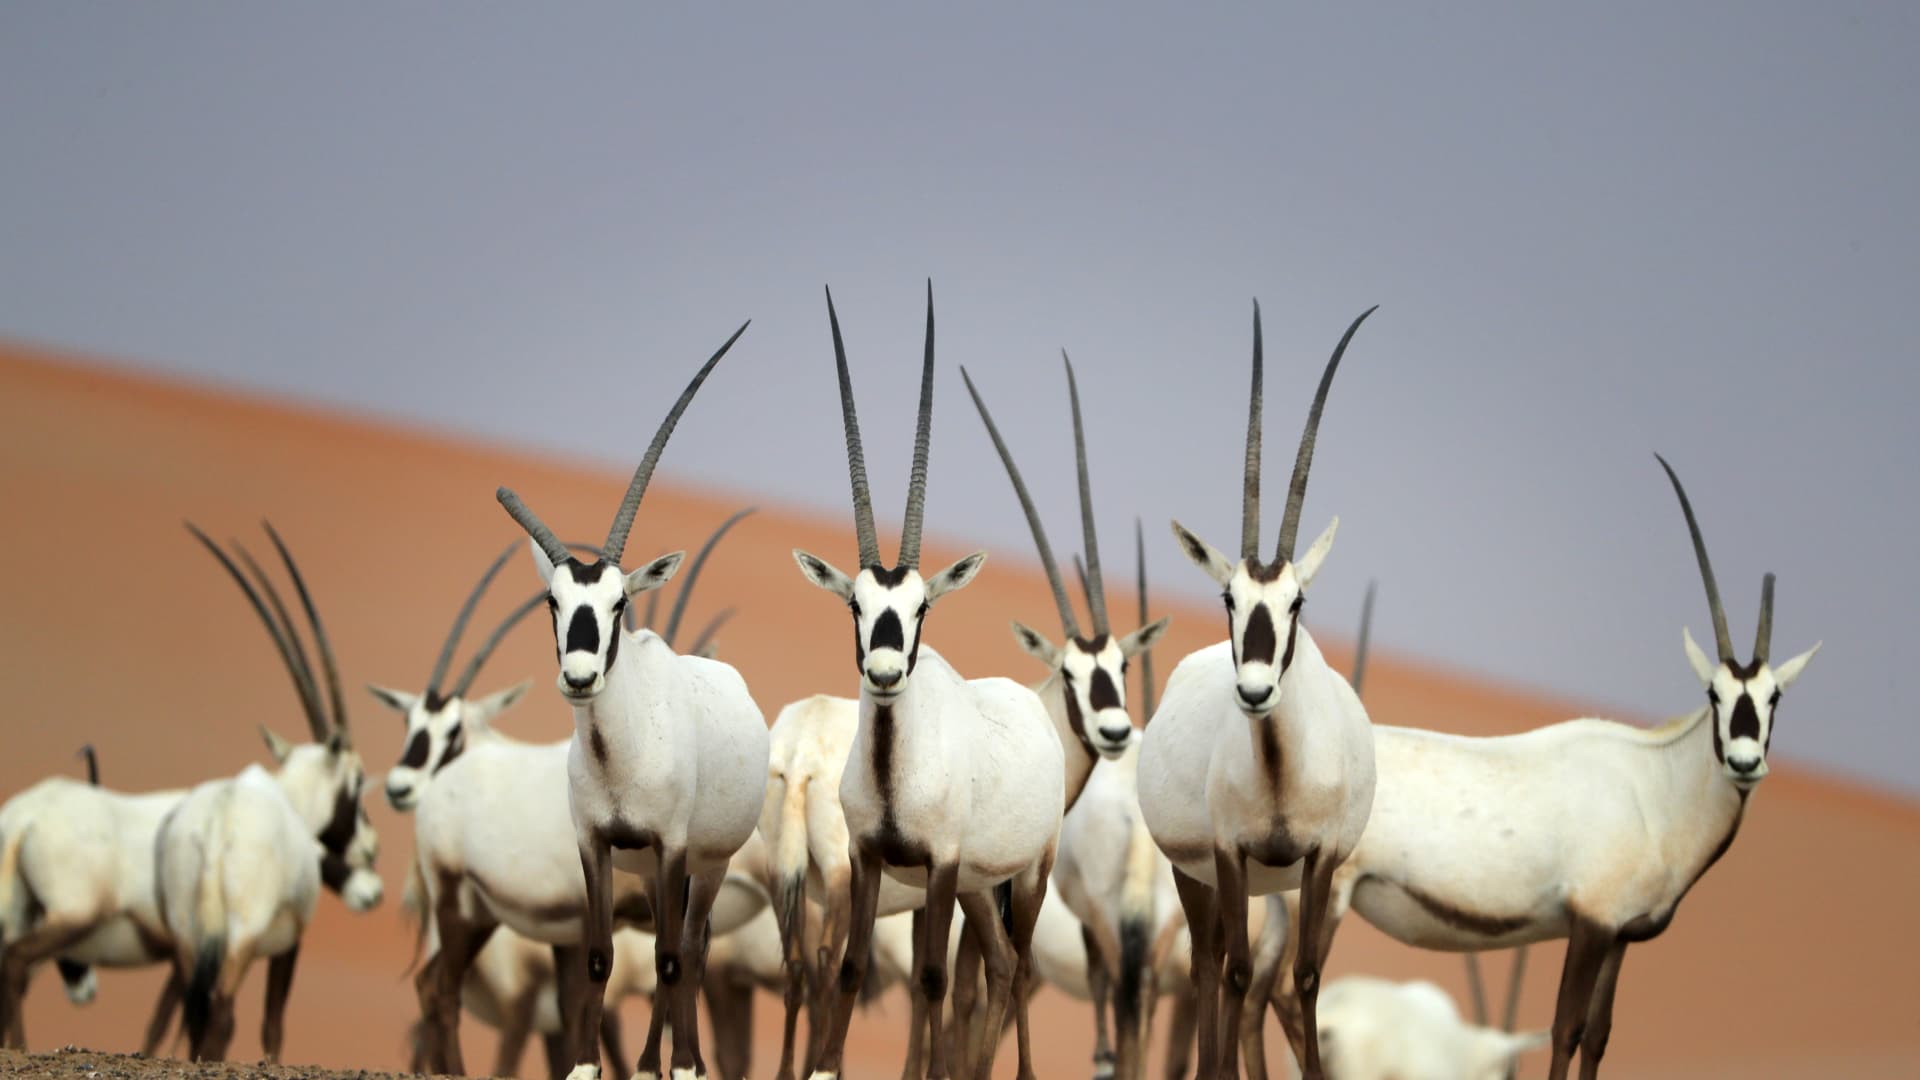 The Arabian Oryx Sanctuary is still on UNESCO's World Heritage website, though it bears a prominent strikethrough through the site name.